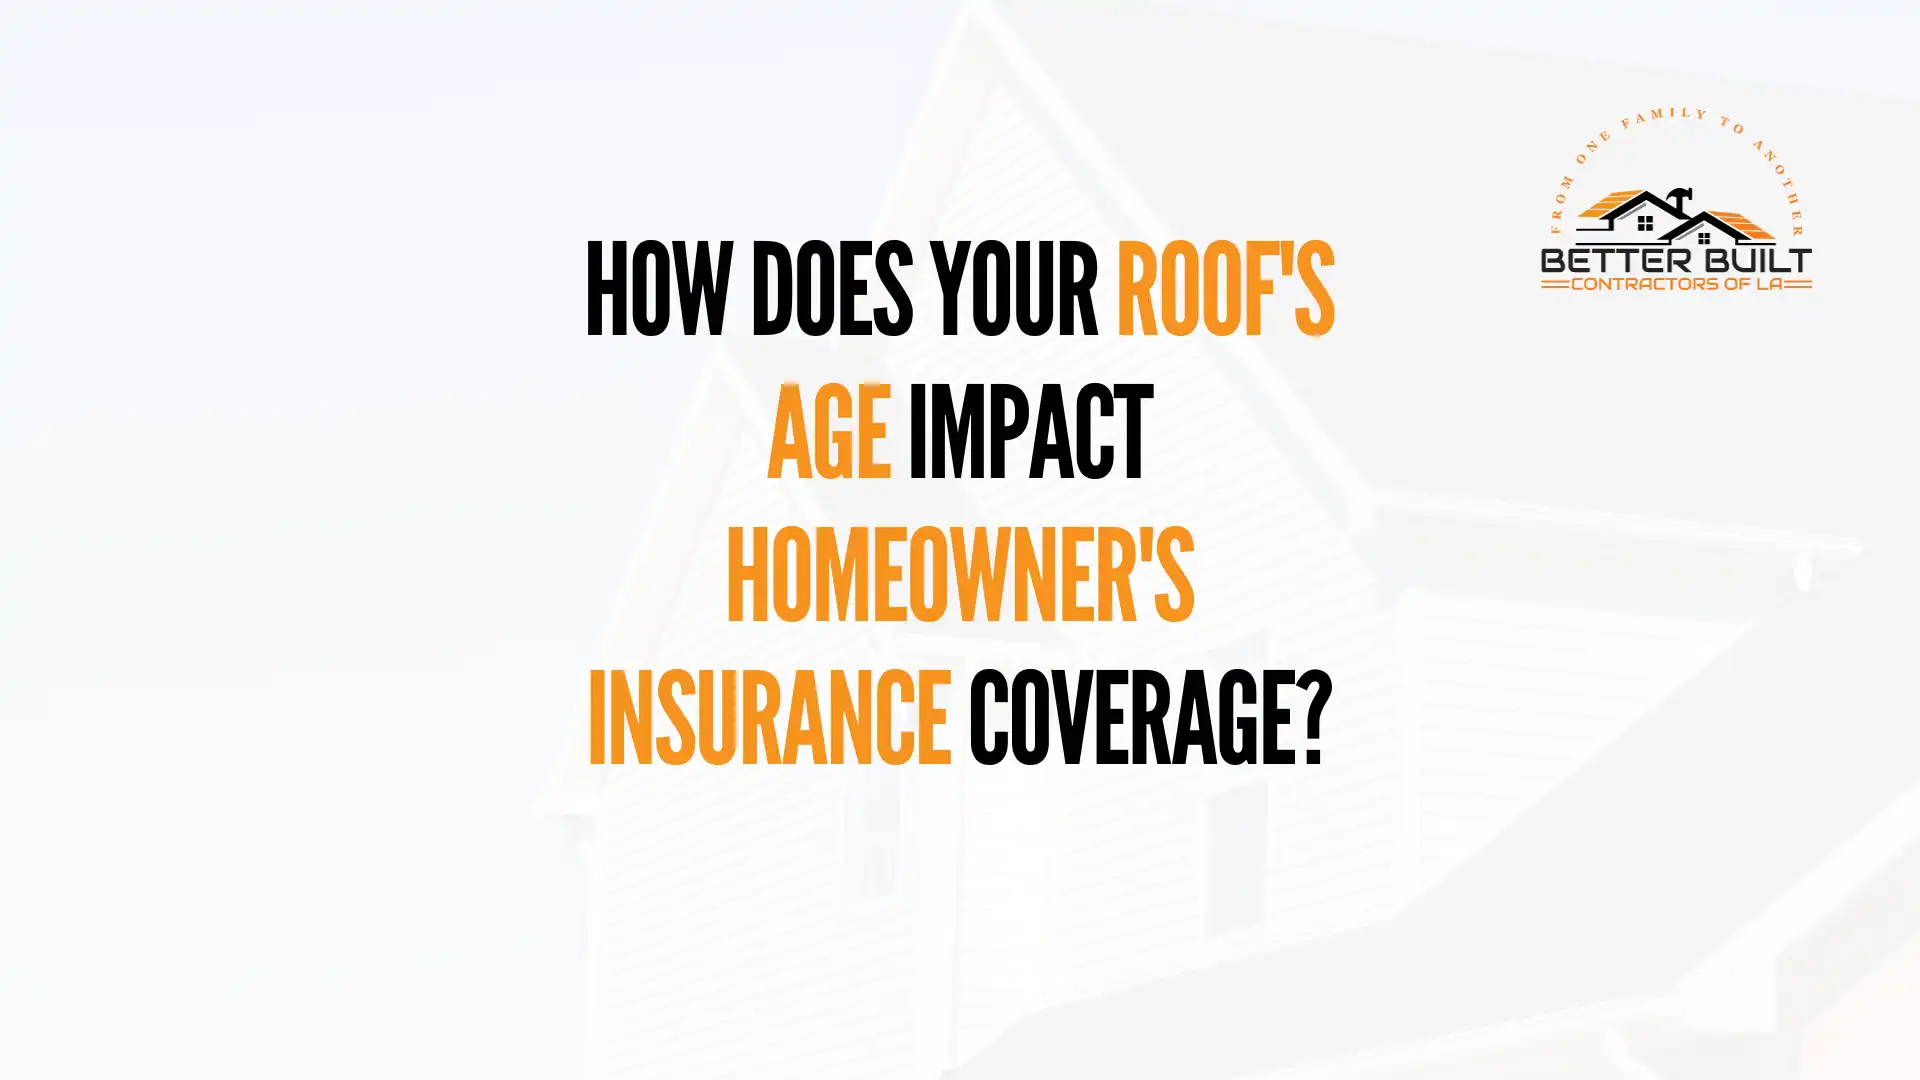 promotional banner for better built contractors highlighting roof age and insurance